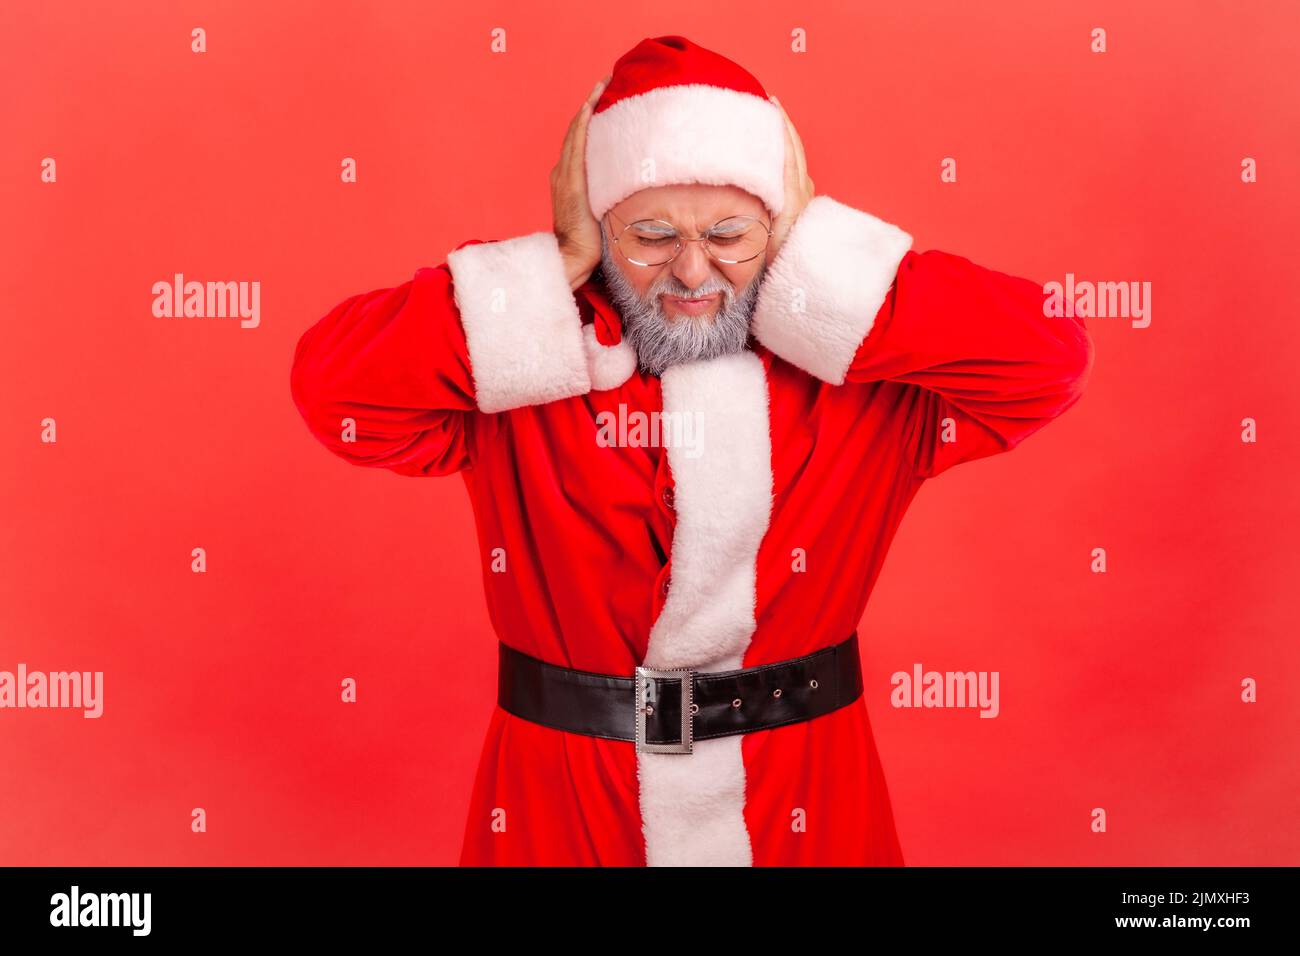 Don't want here. Elderly man with gray beard wearing santa claus costume standing covering ears with palms, loud noise, frowning face. Indoor studio shot isolated on red background. Stock Photo